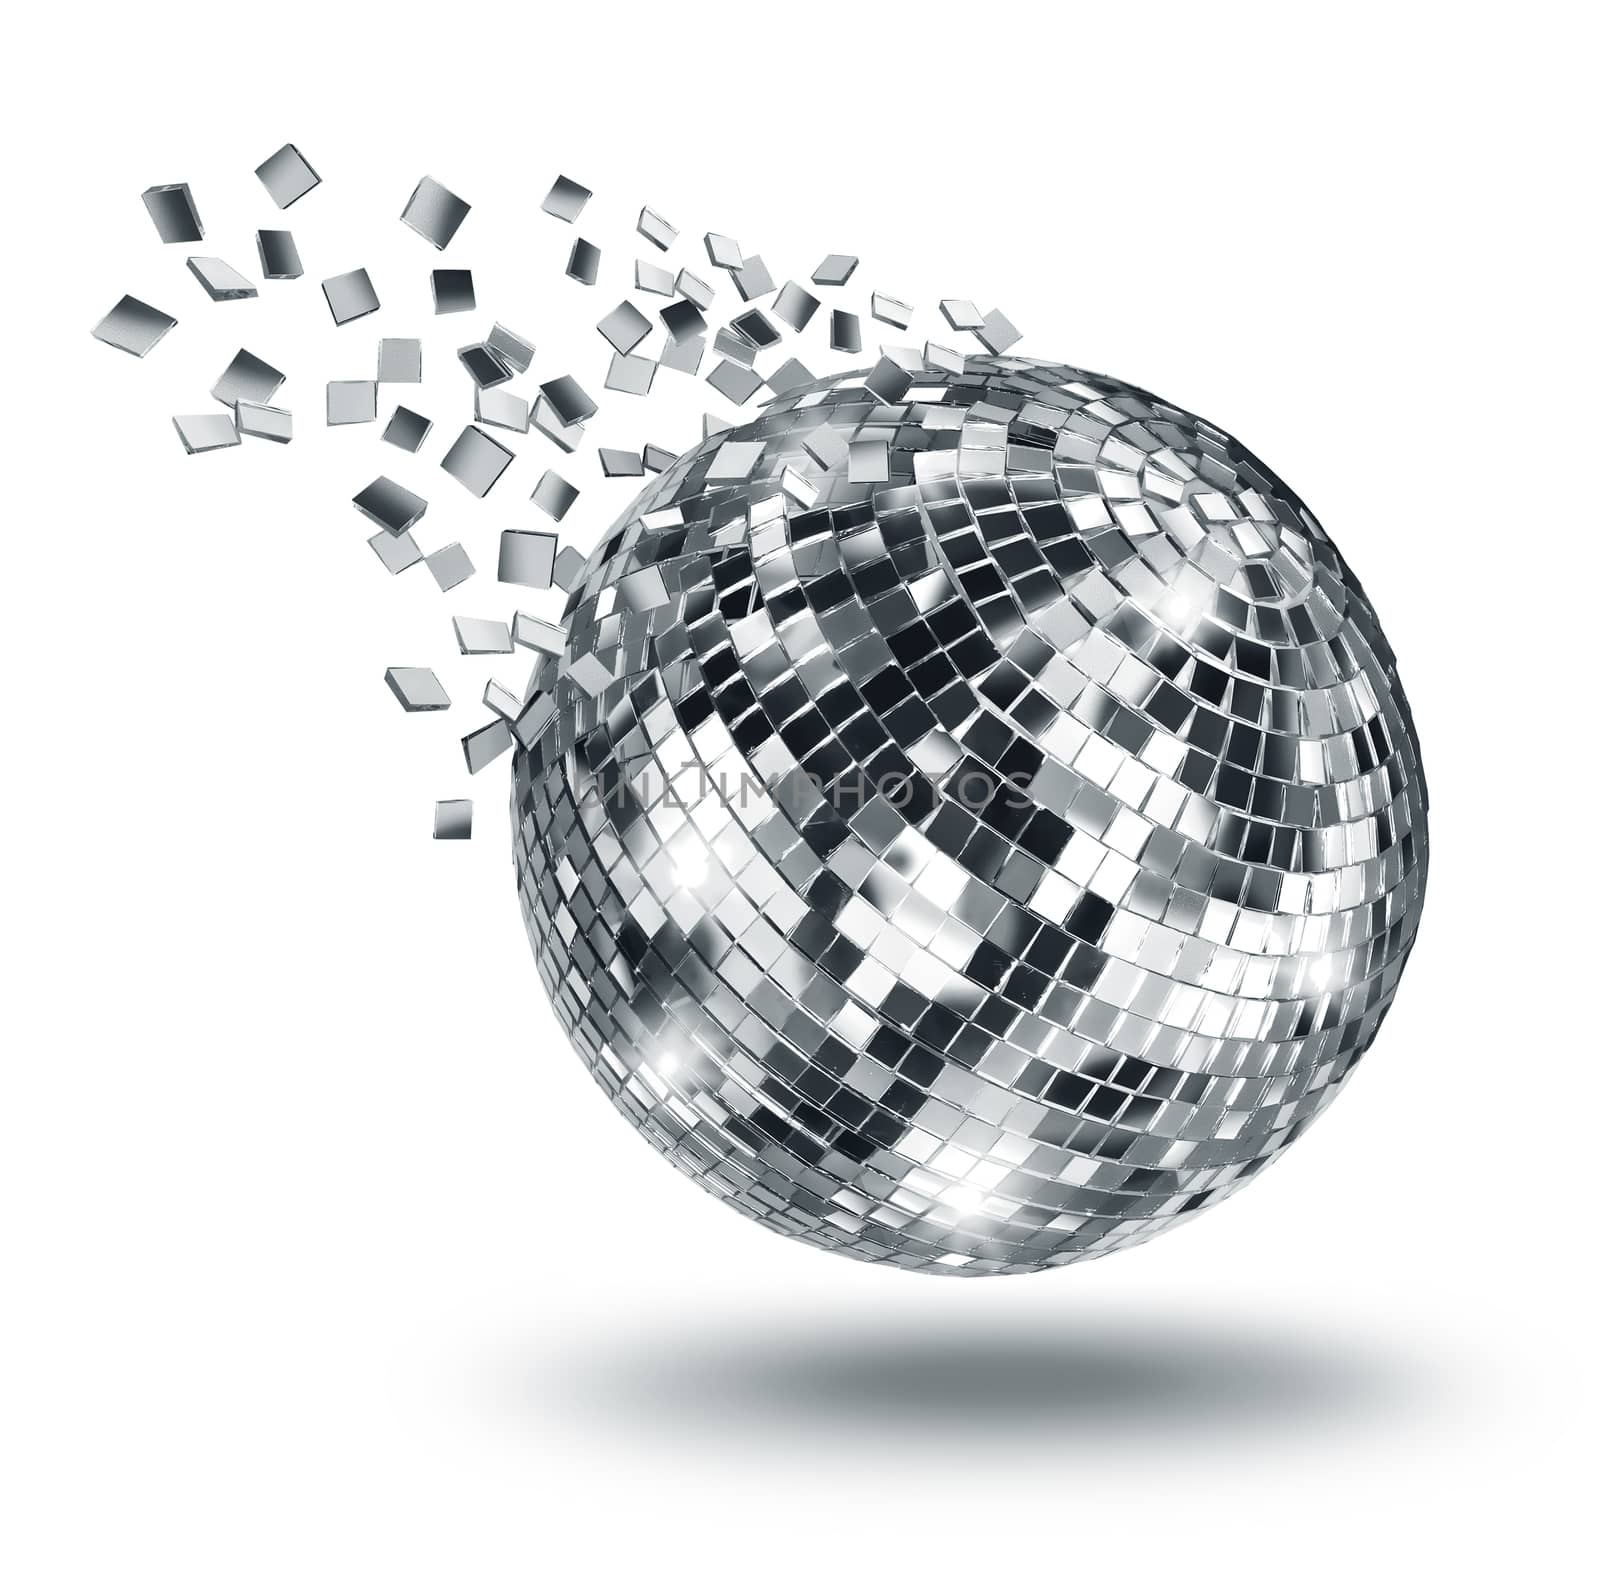 Vintage disco mirror ball breaking into flying glass pixel fragments on white background